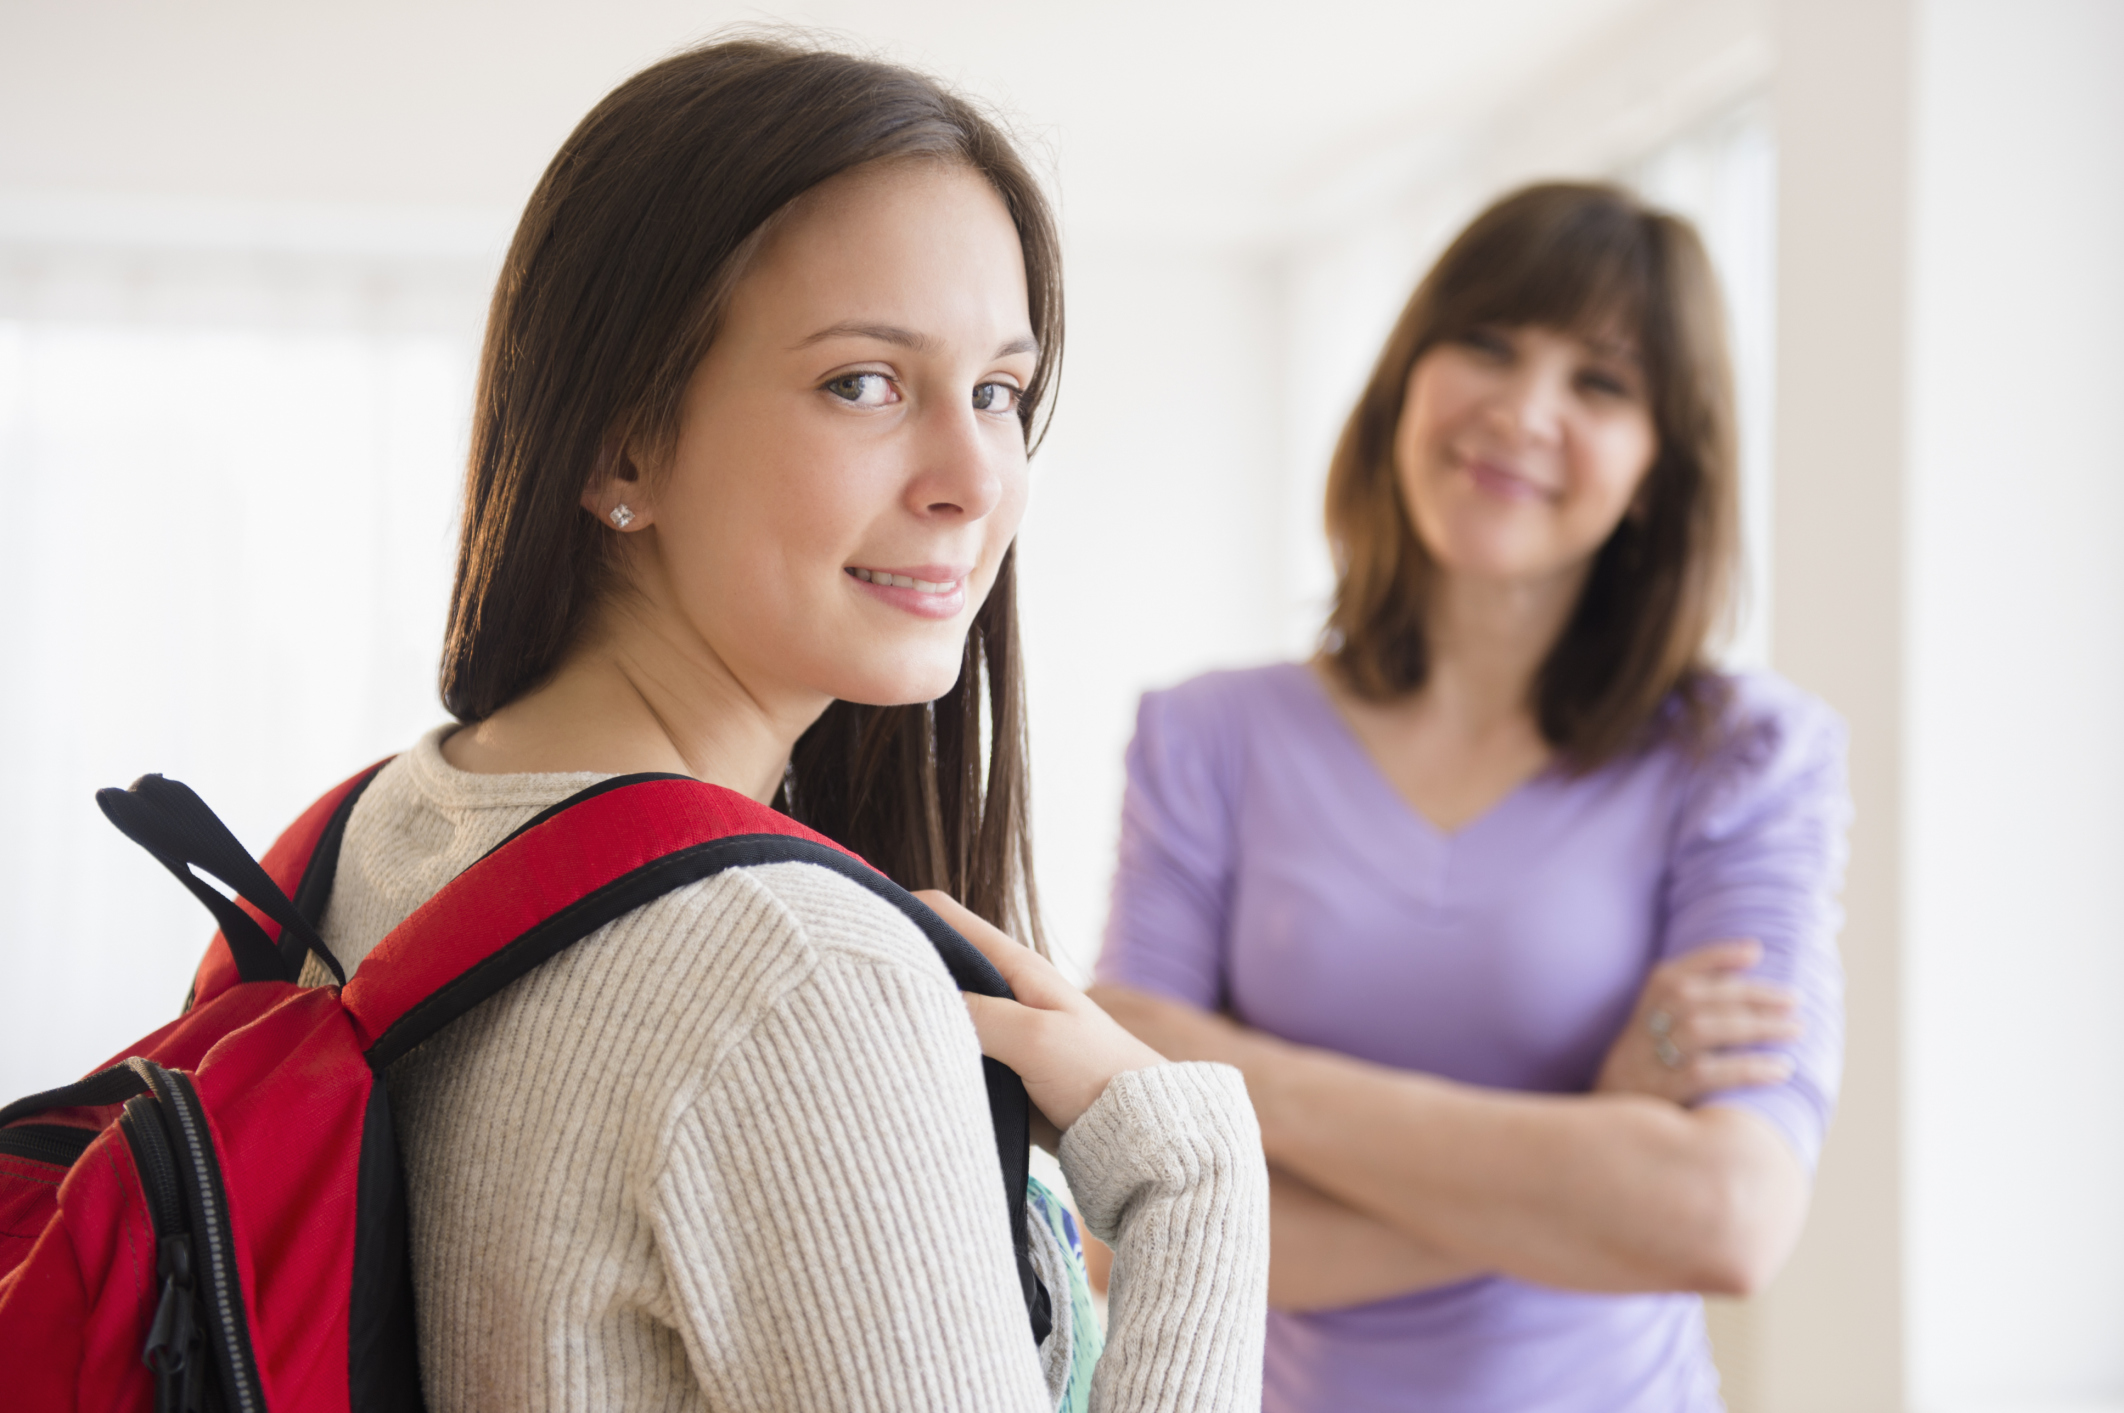 5 Skills Every Child Should Know Before High School